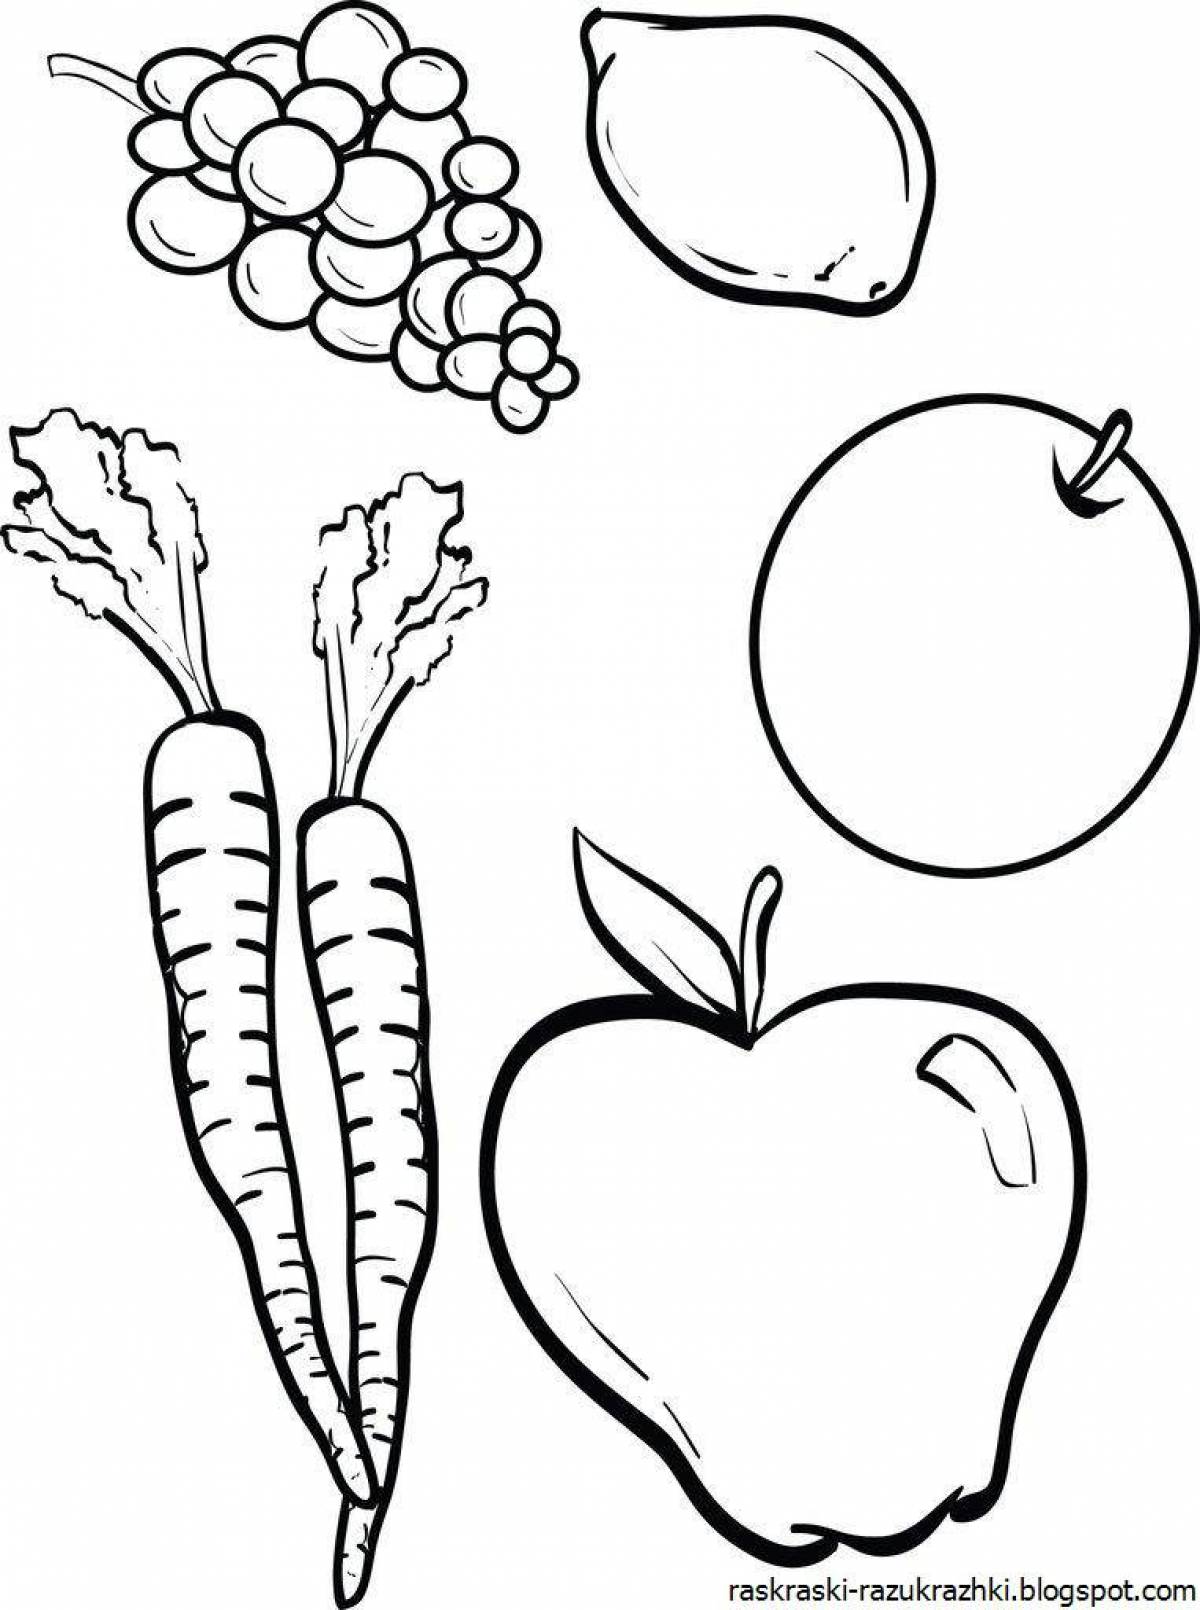 Fun coloring fruits and vegetables